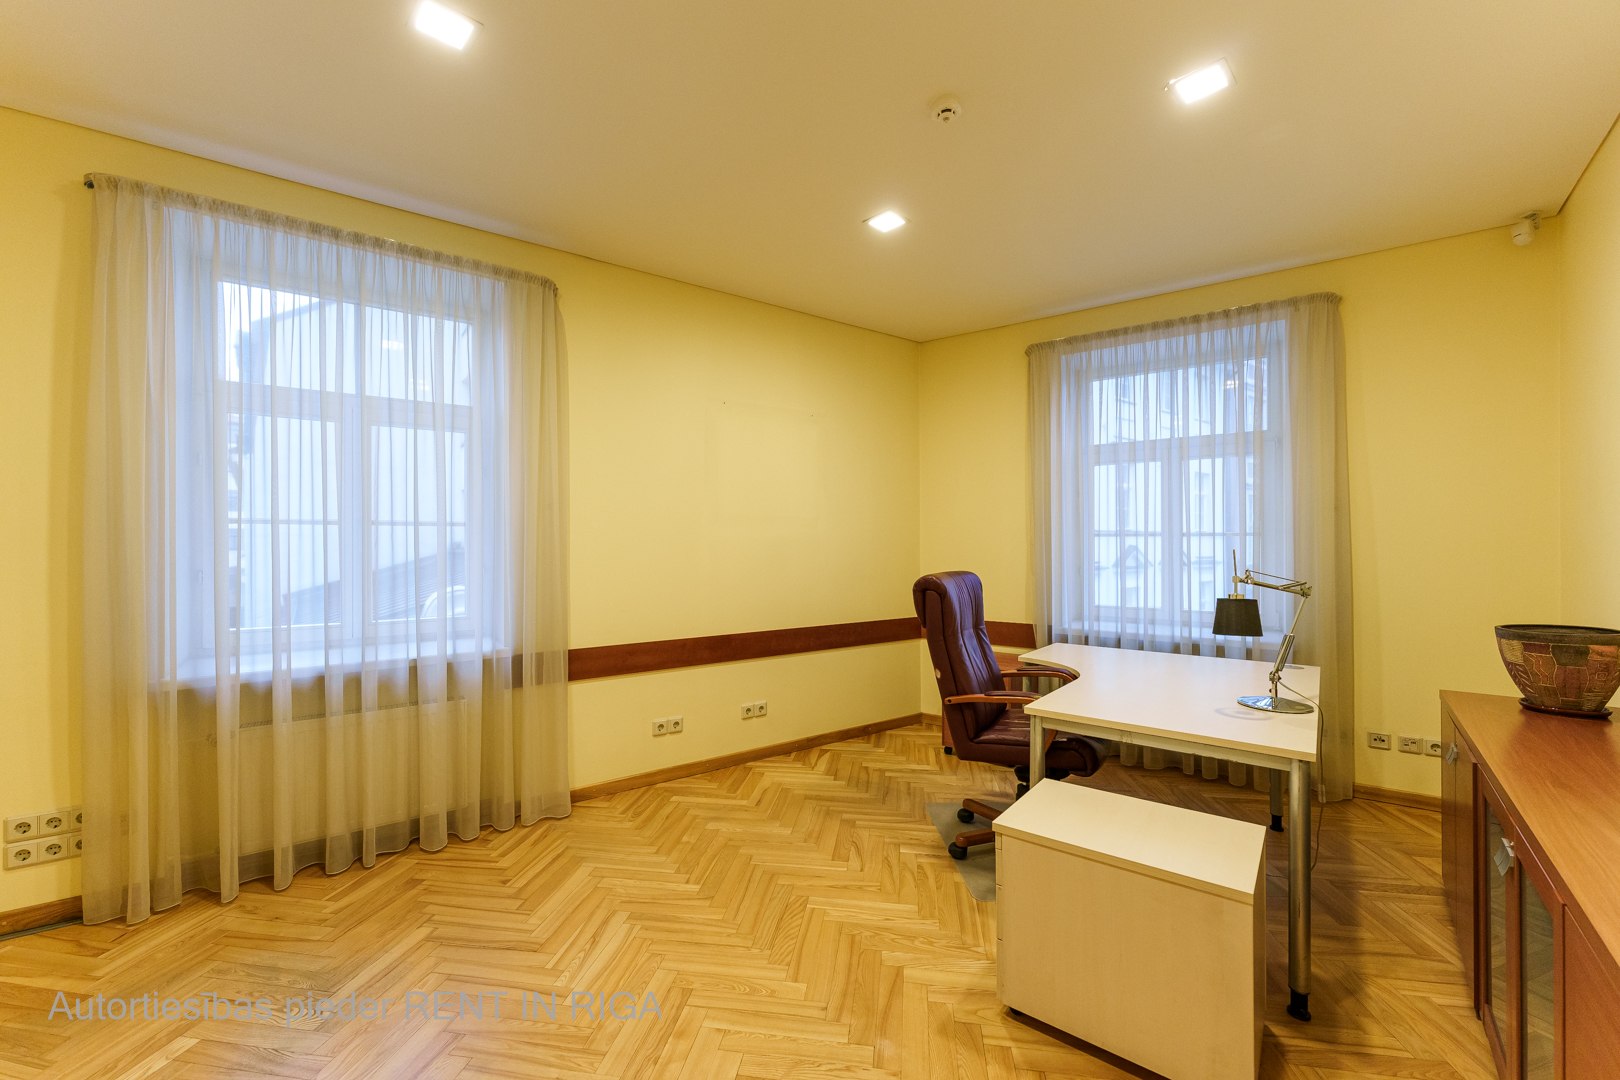 Office for rent, Doma laukums - Image 1